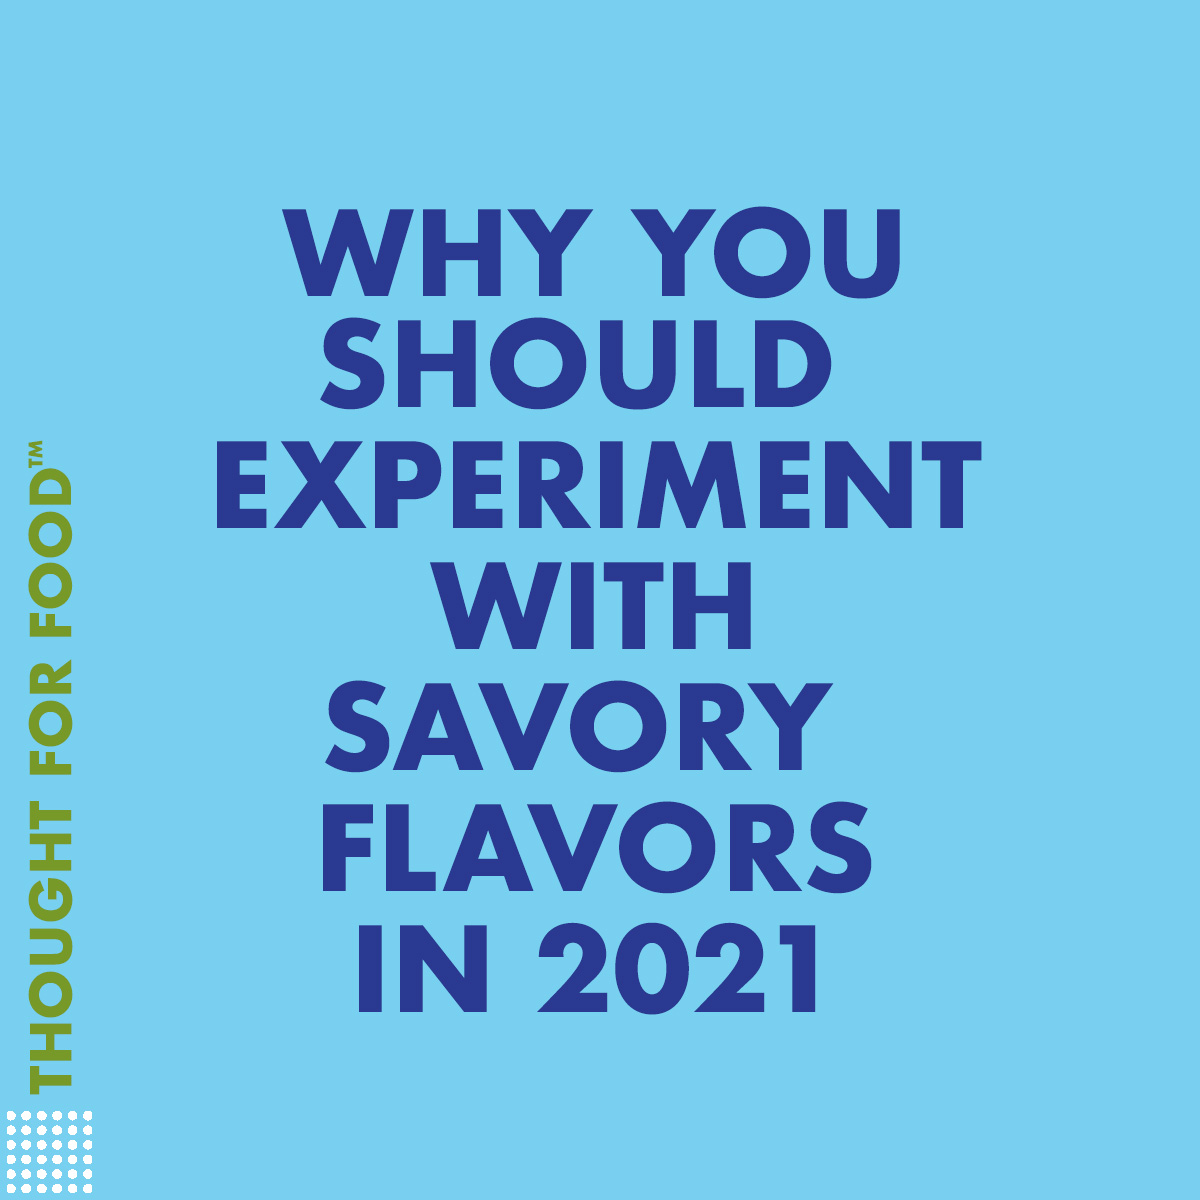 Why you should experiment with savory flavors in 2021